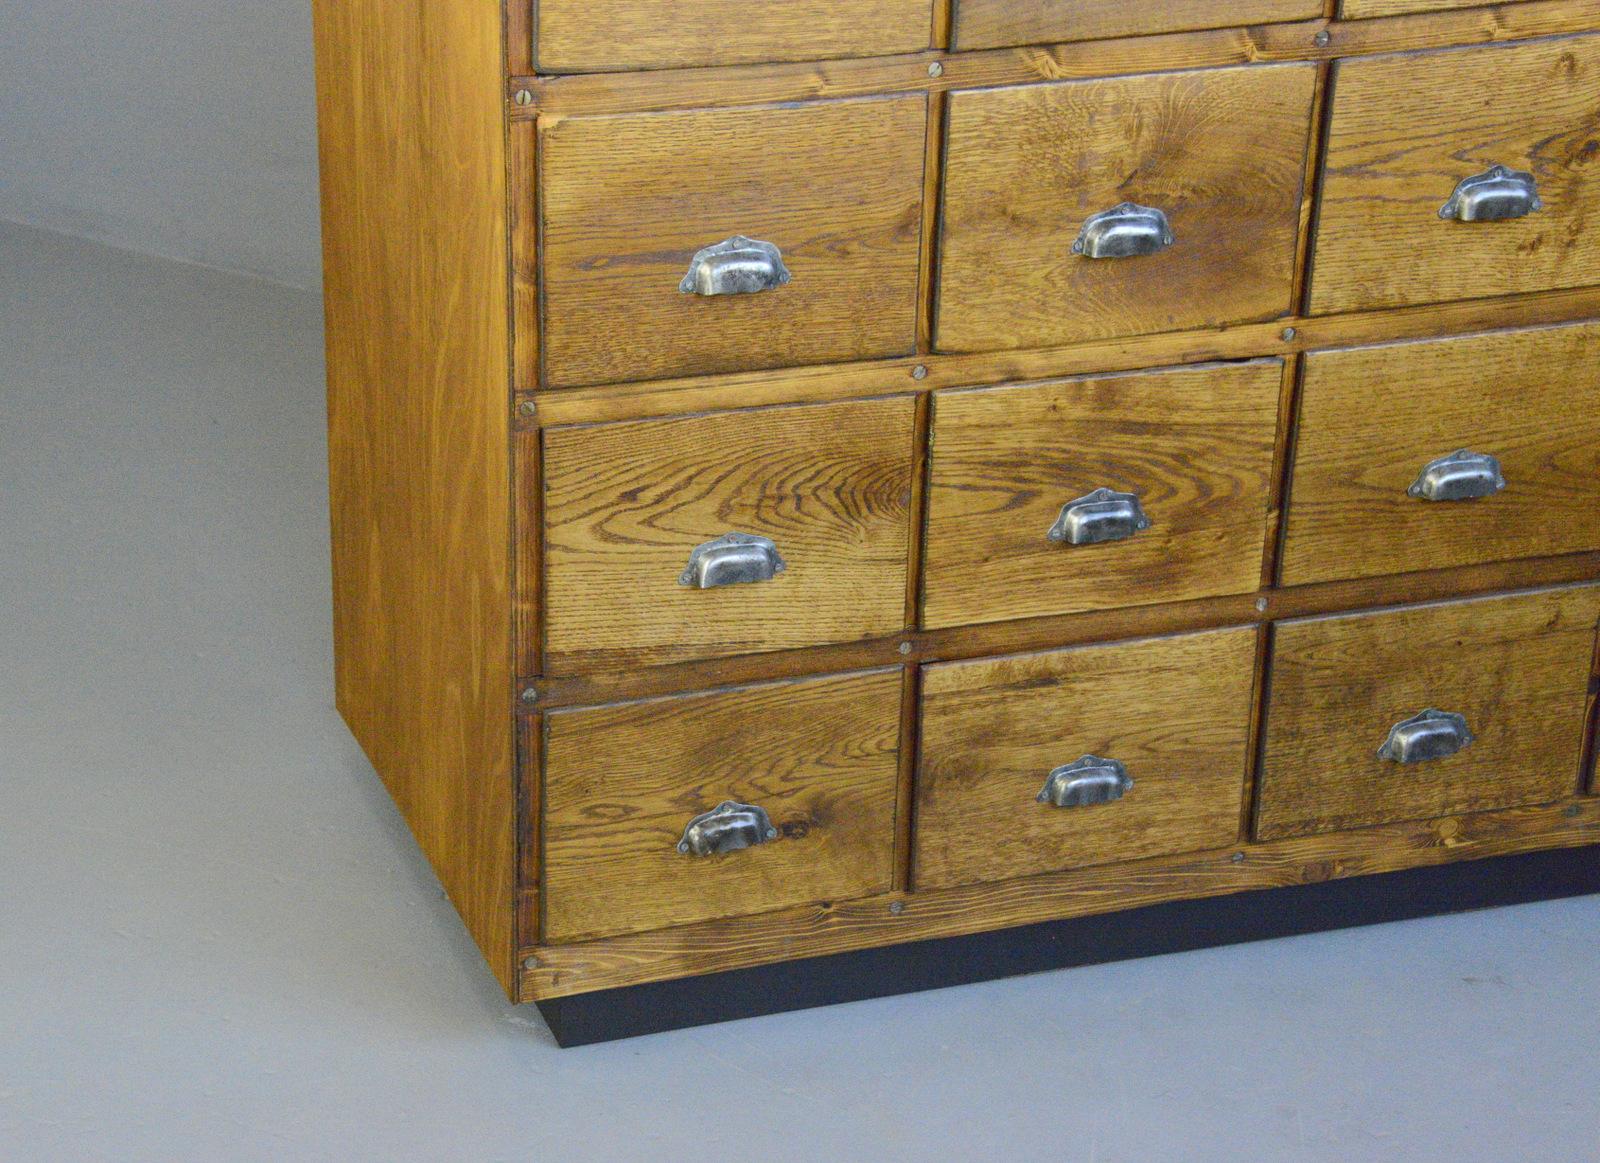 French workshop drawers, Circa 1930s

- Solid oak drawer fronts
- Solid pine sides and frame
- Original steel cup handles
- 24 large drawers
- Drawers have their original metal rollers
- French ~ 1930s
- 139cm wide x 65cm deep x 166cm